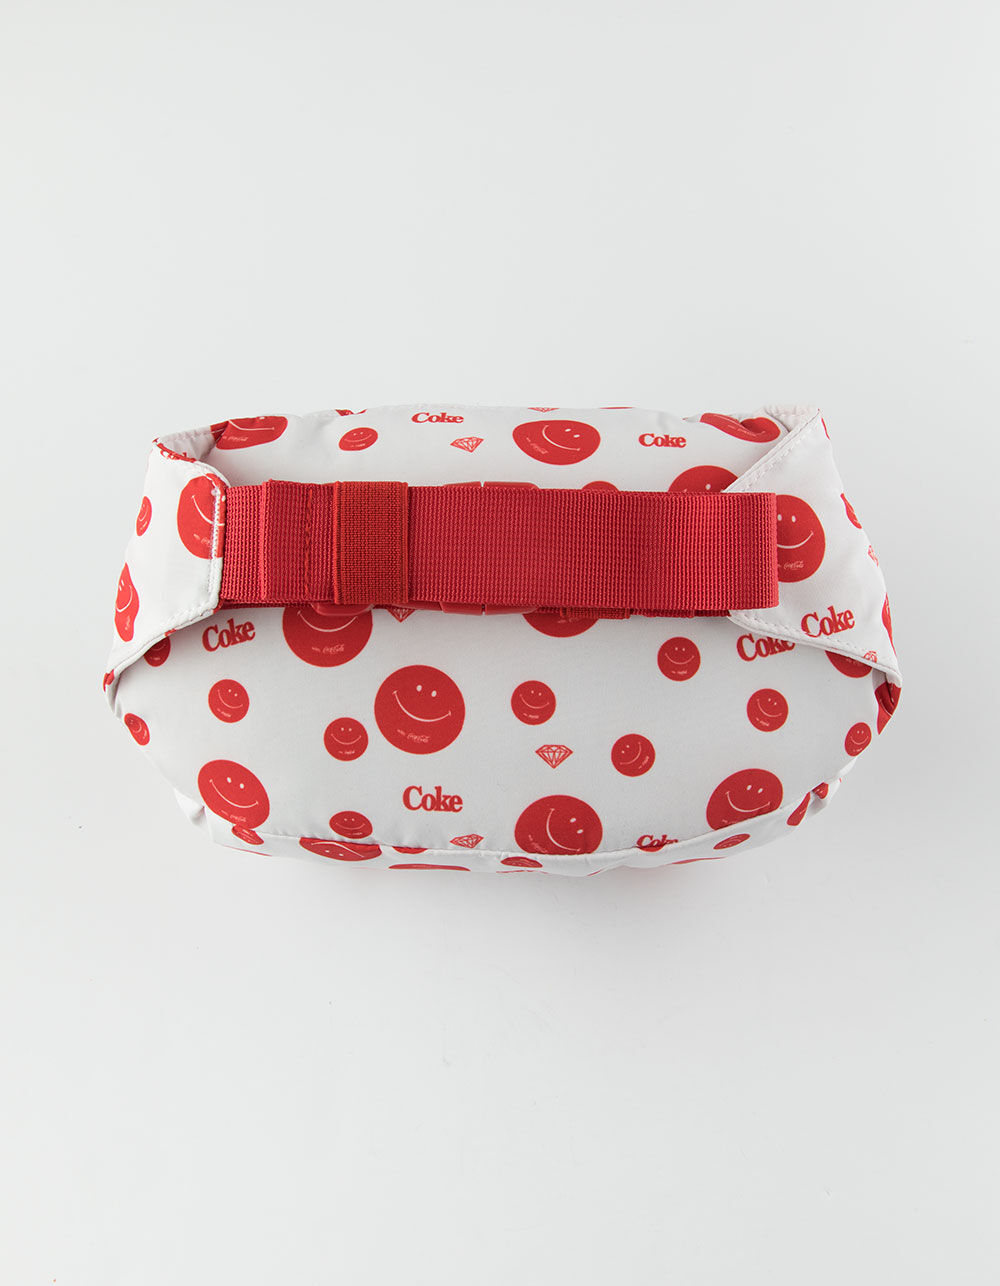 DIAMOND SUPPLY CO. x Coca-Cola Smiley Fanny Pack image number 2